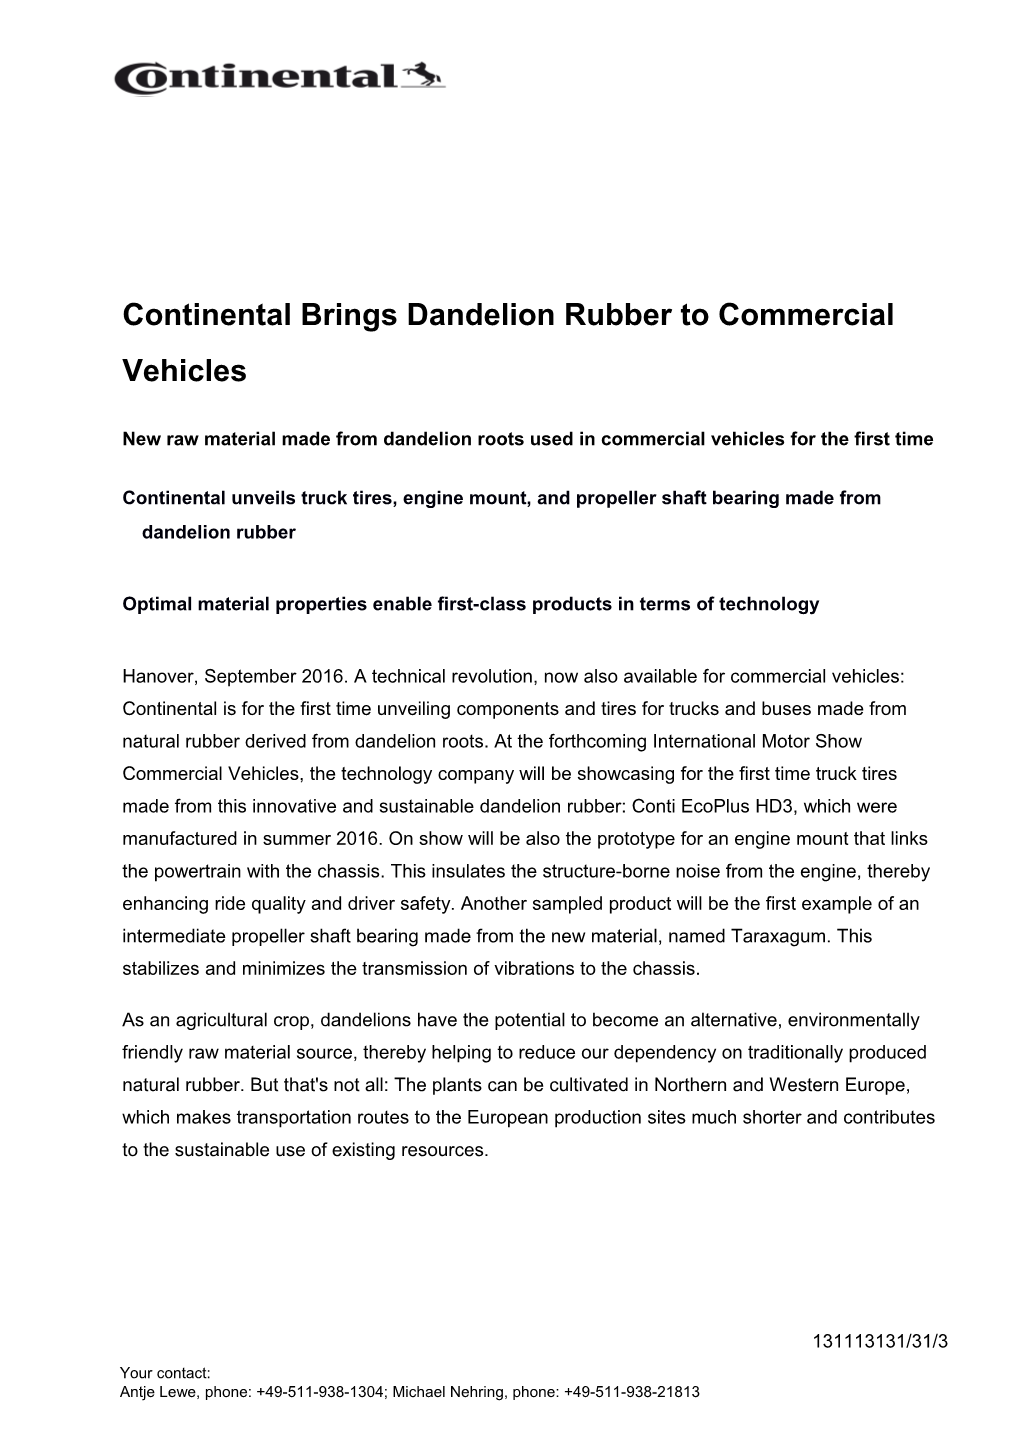 Continental Brings Dandelion Rubber to Commercial Vehicles